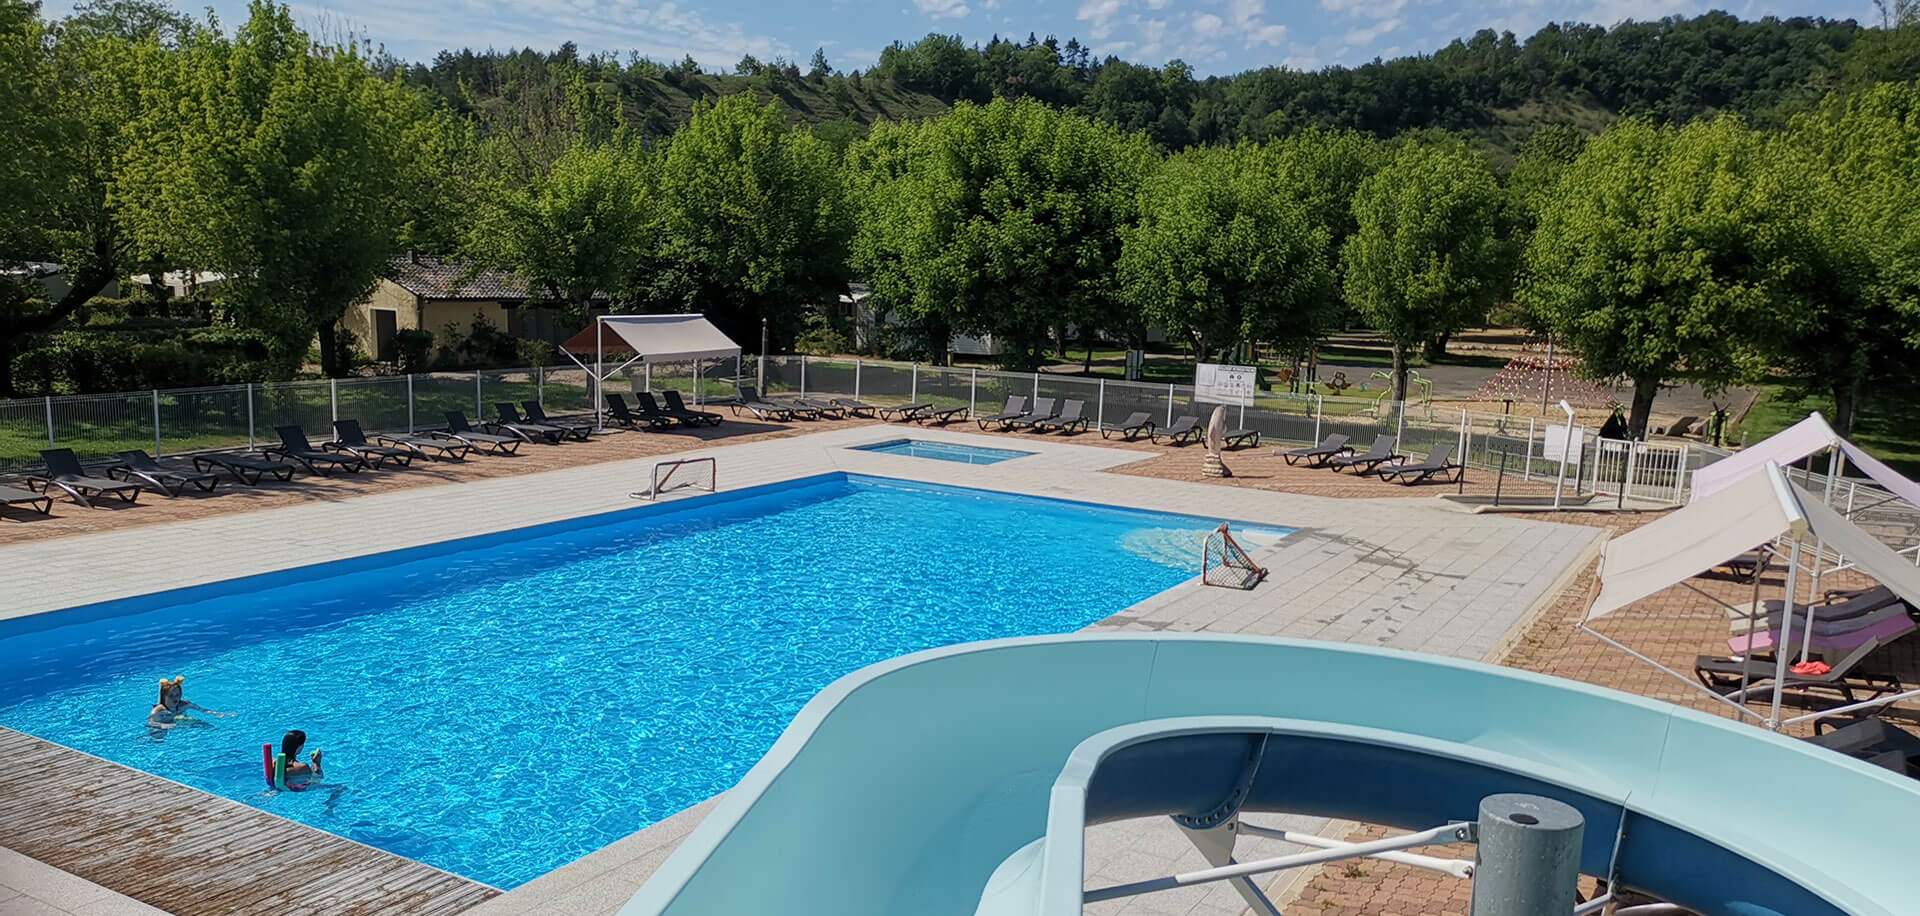 Swimming pool of the campsite in Périgord